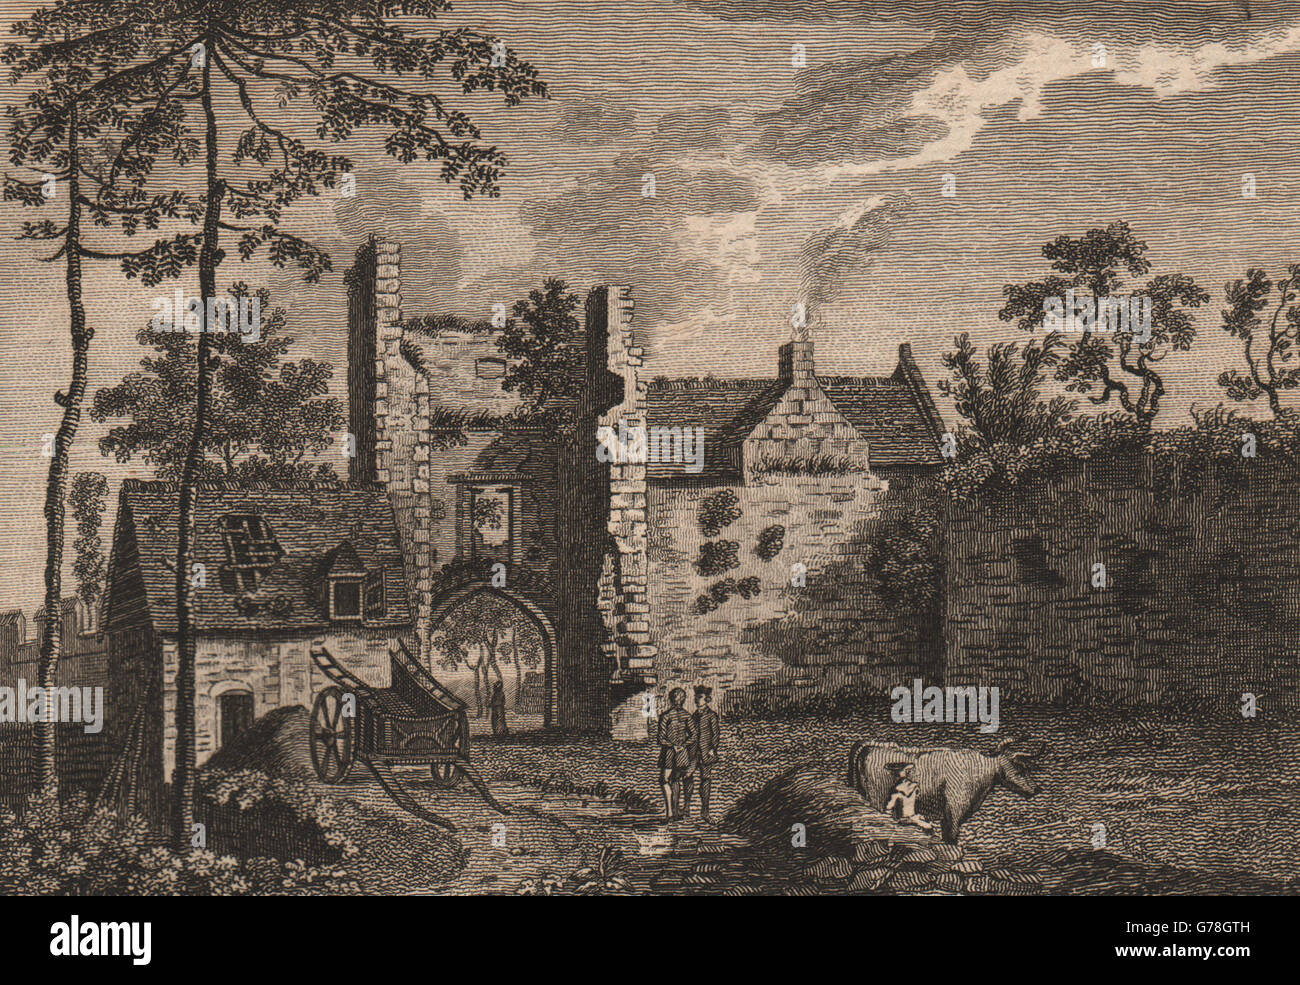 FARLEIGH HUNGERFORD CASTLE. Farley, Somersetshire 'Château'. Planche 1. GROSE, 1776 Banque D'Images